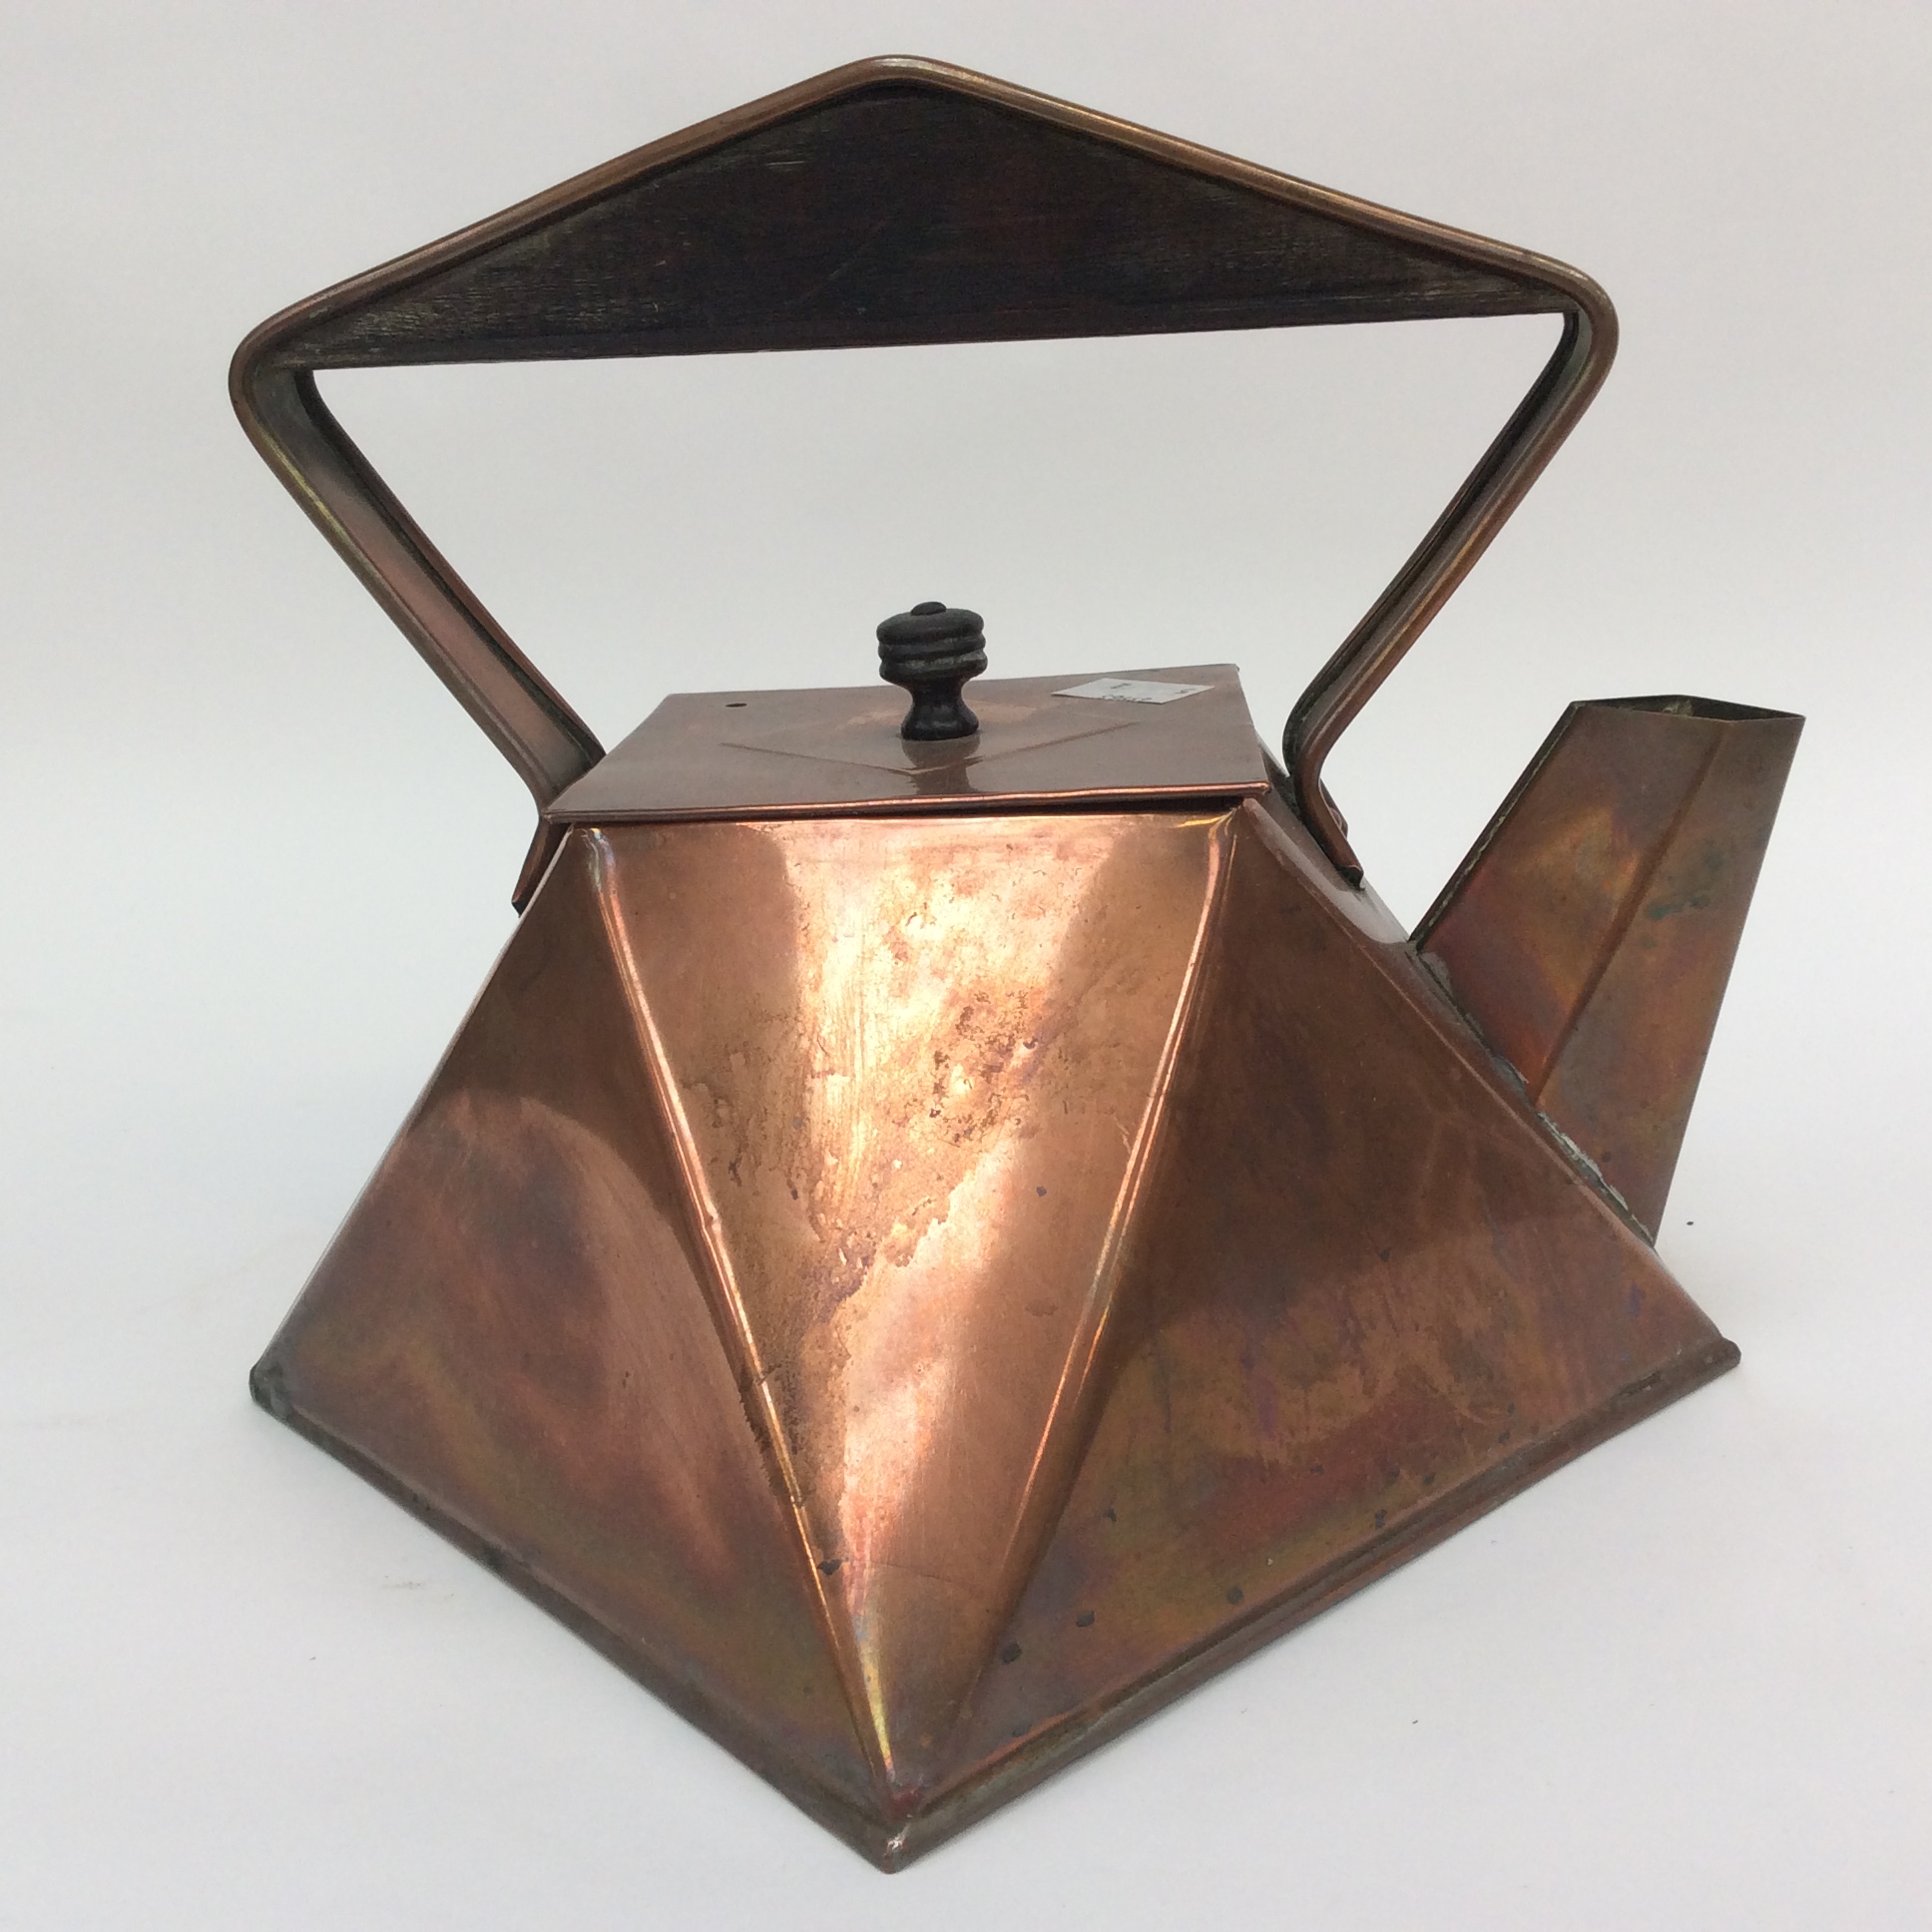 An early 20th Century Cubics copper kettle in the style of Dresser